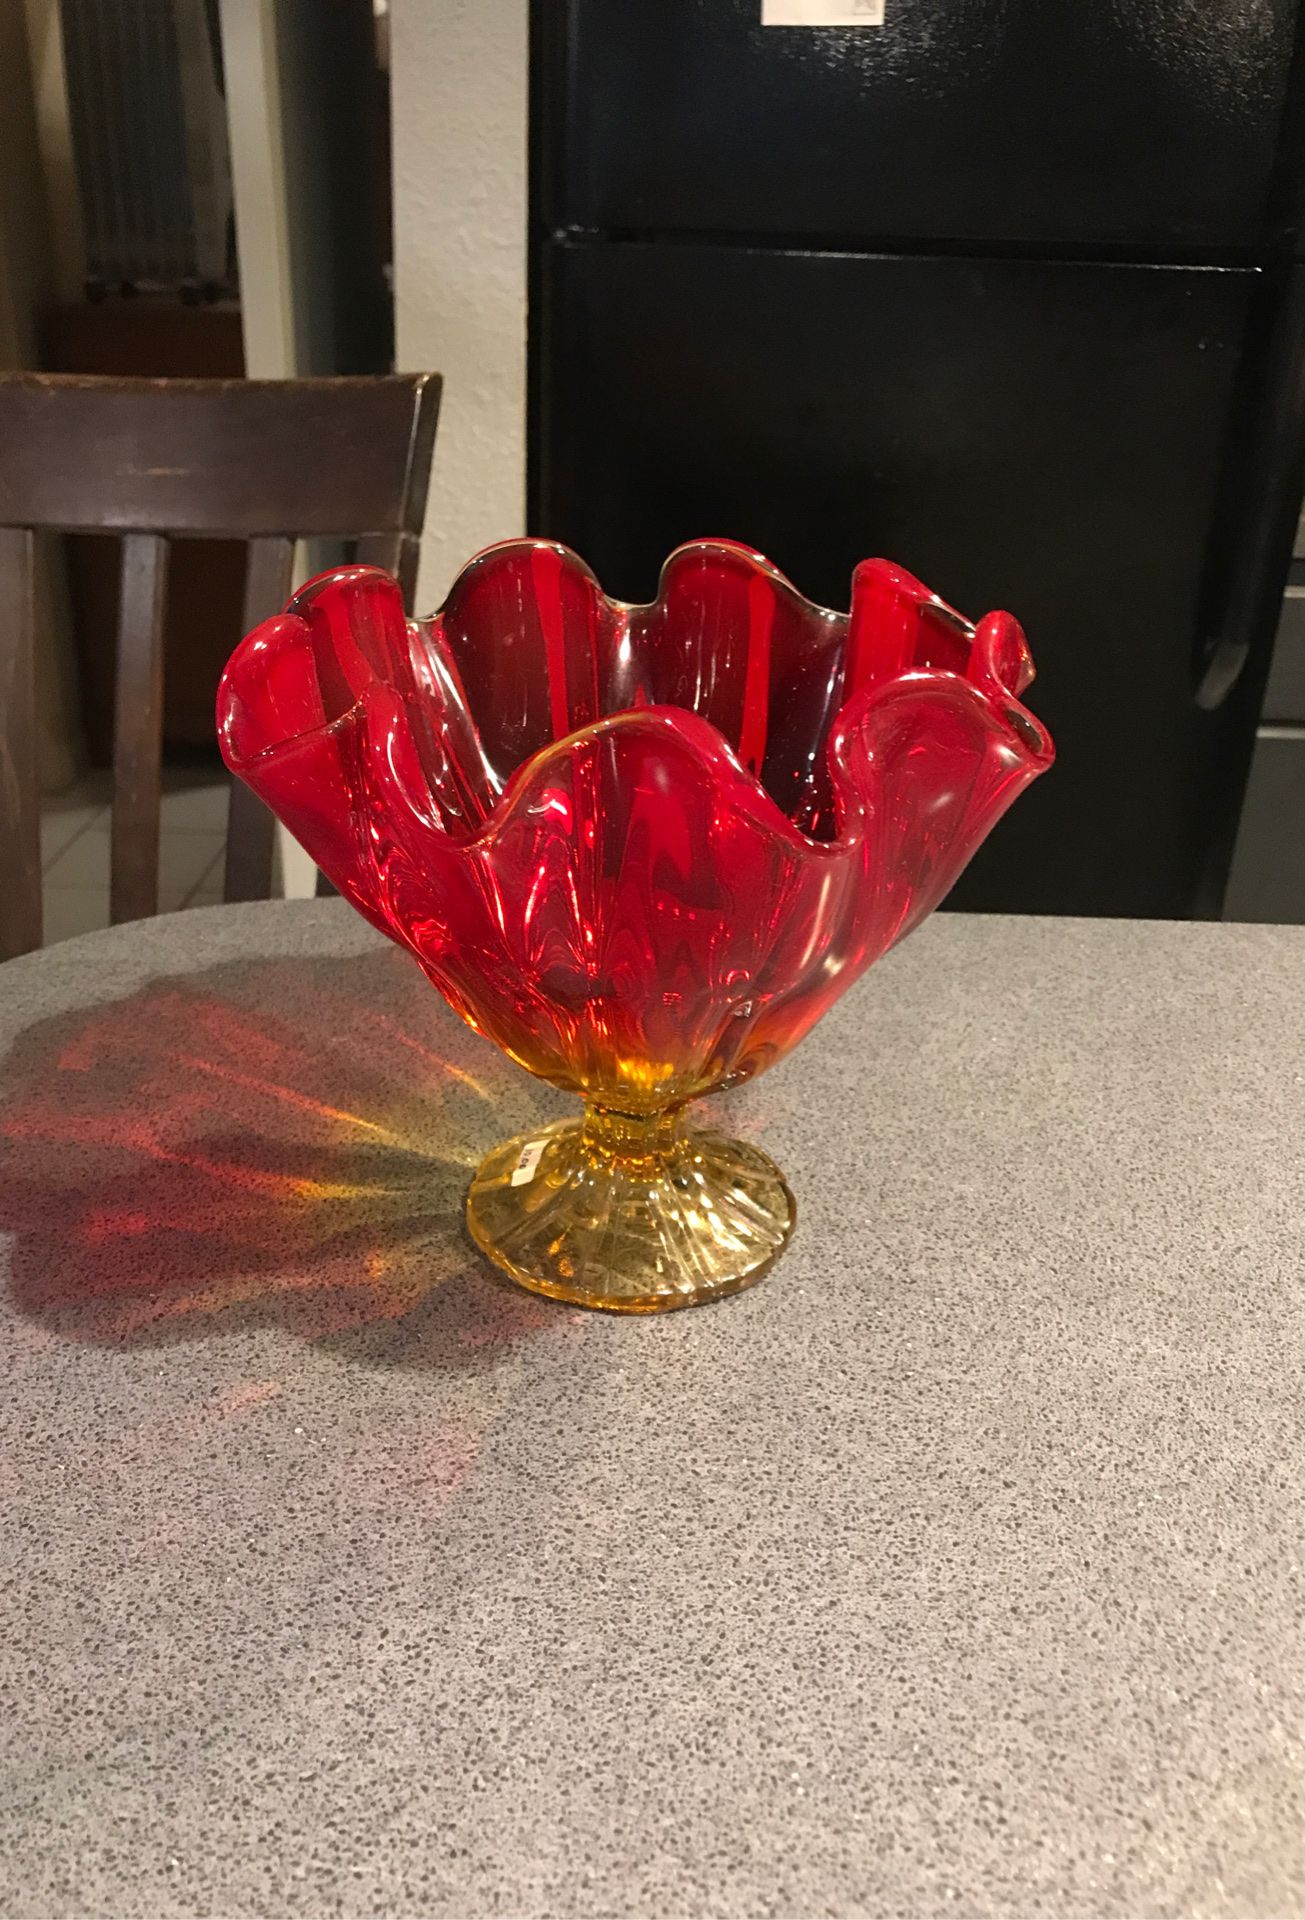 Red/yellow candy dish